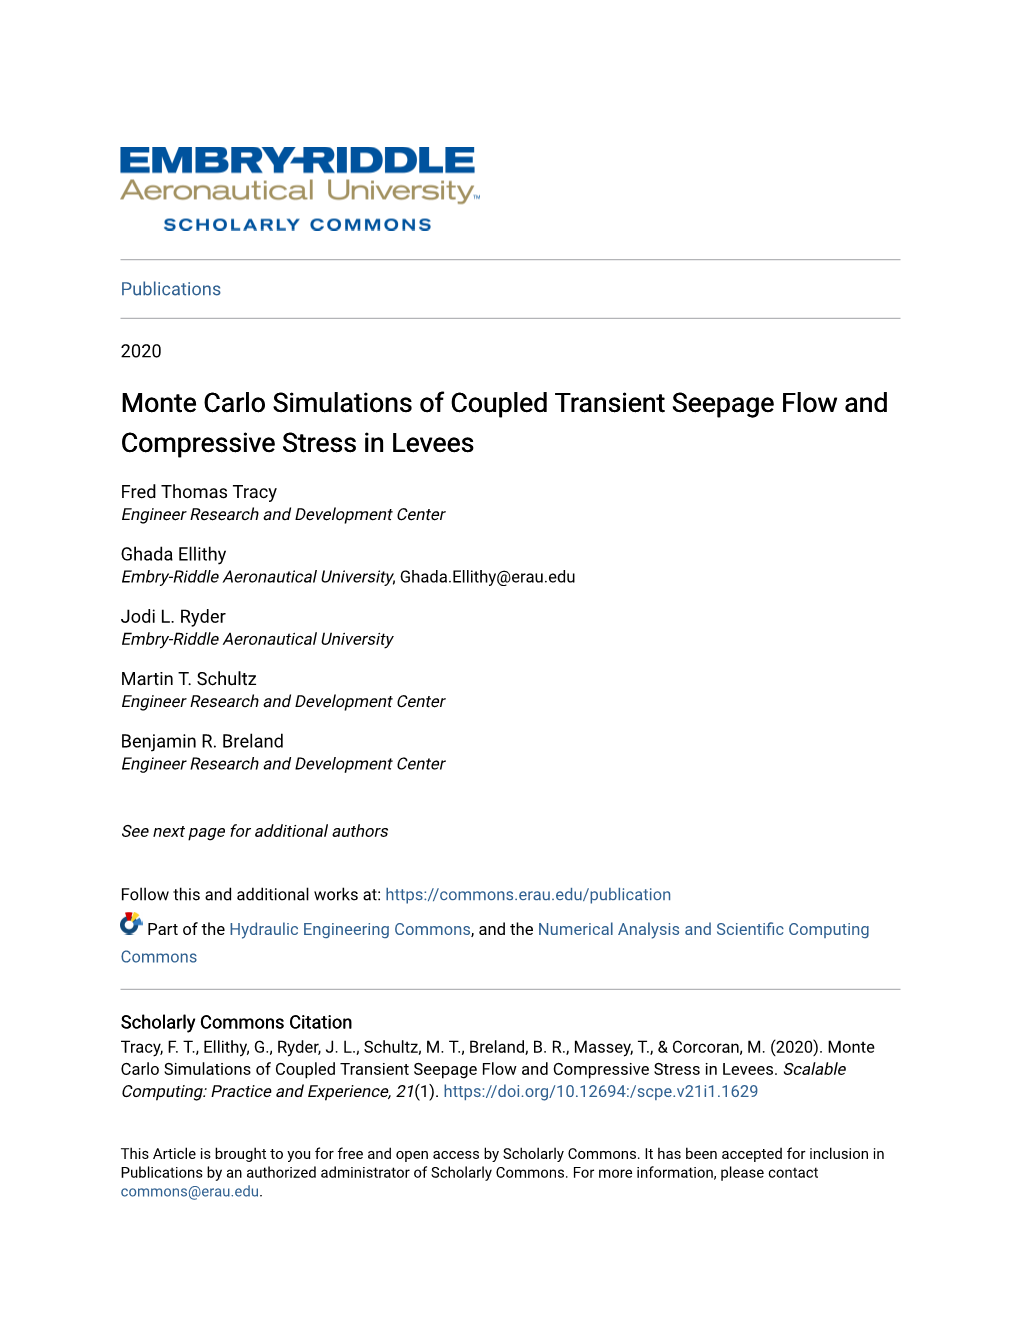 Monte Carlo Simulations of Coupled Transient Seepage Flow and Compressive Stress in Levees